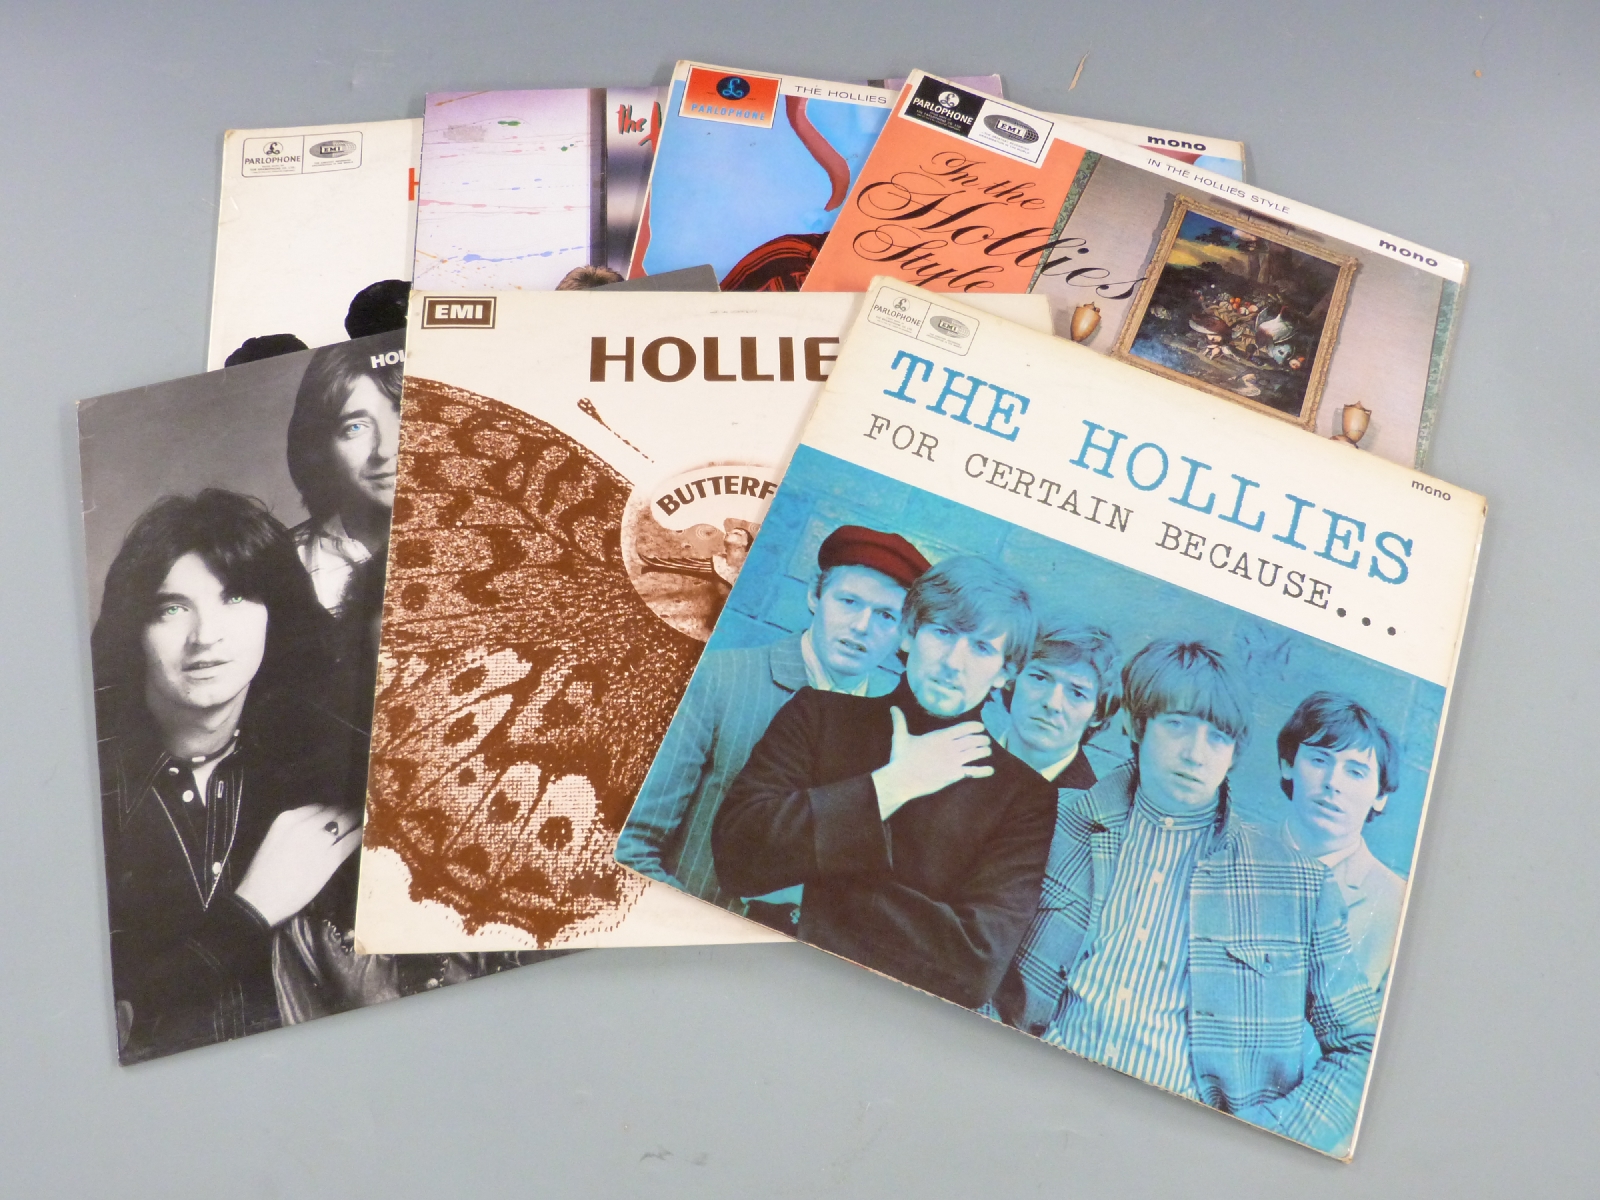 The Hollies - 7 LPs including Stay With, Style, Hollies, Certain and Butterfly. - Image 2 of 2